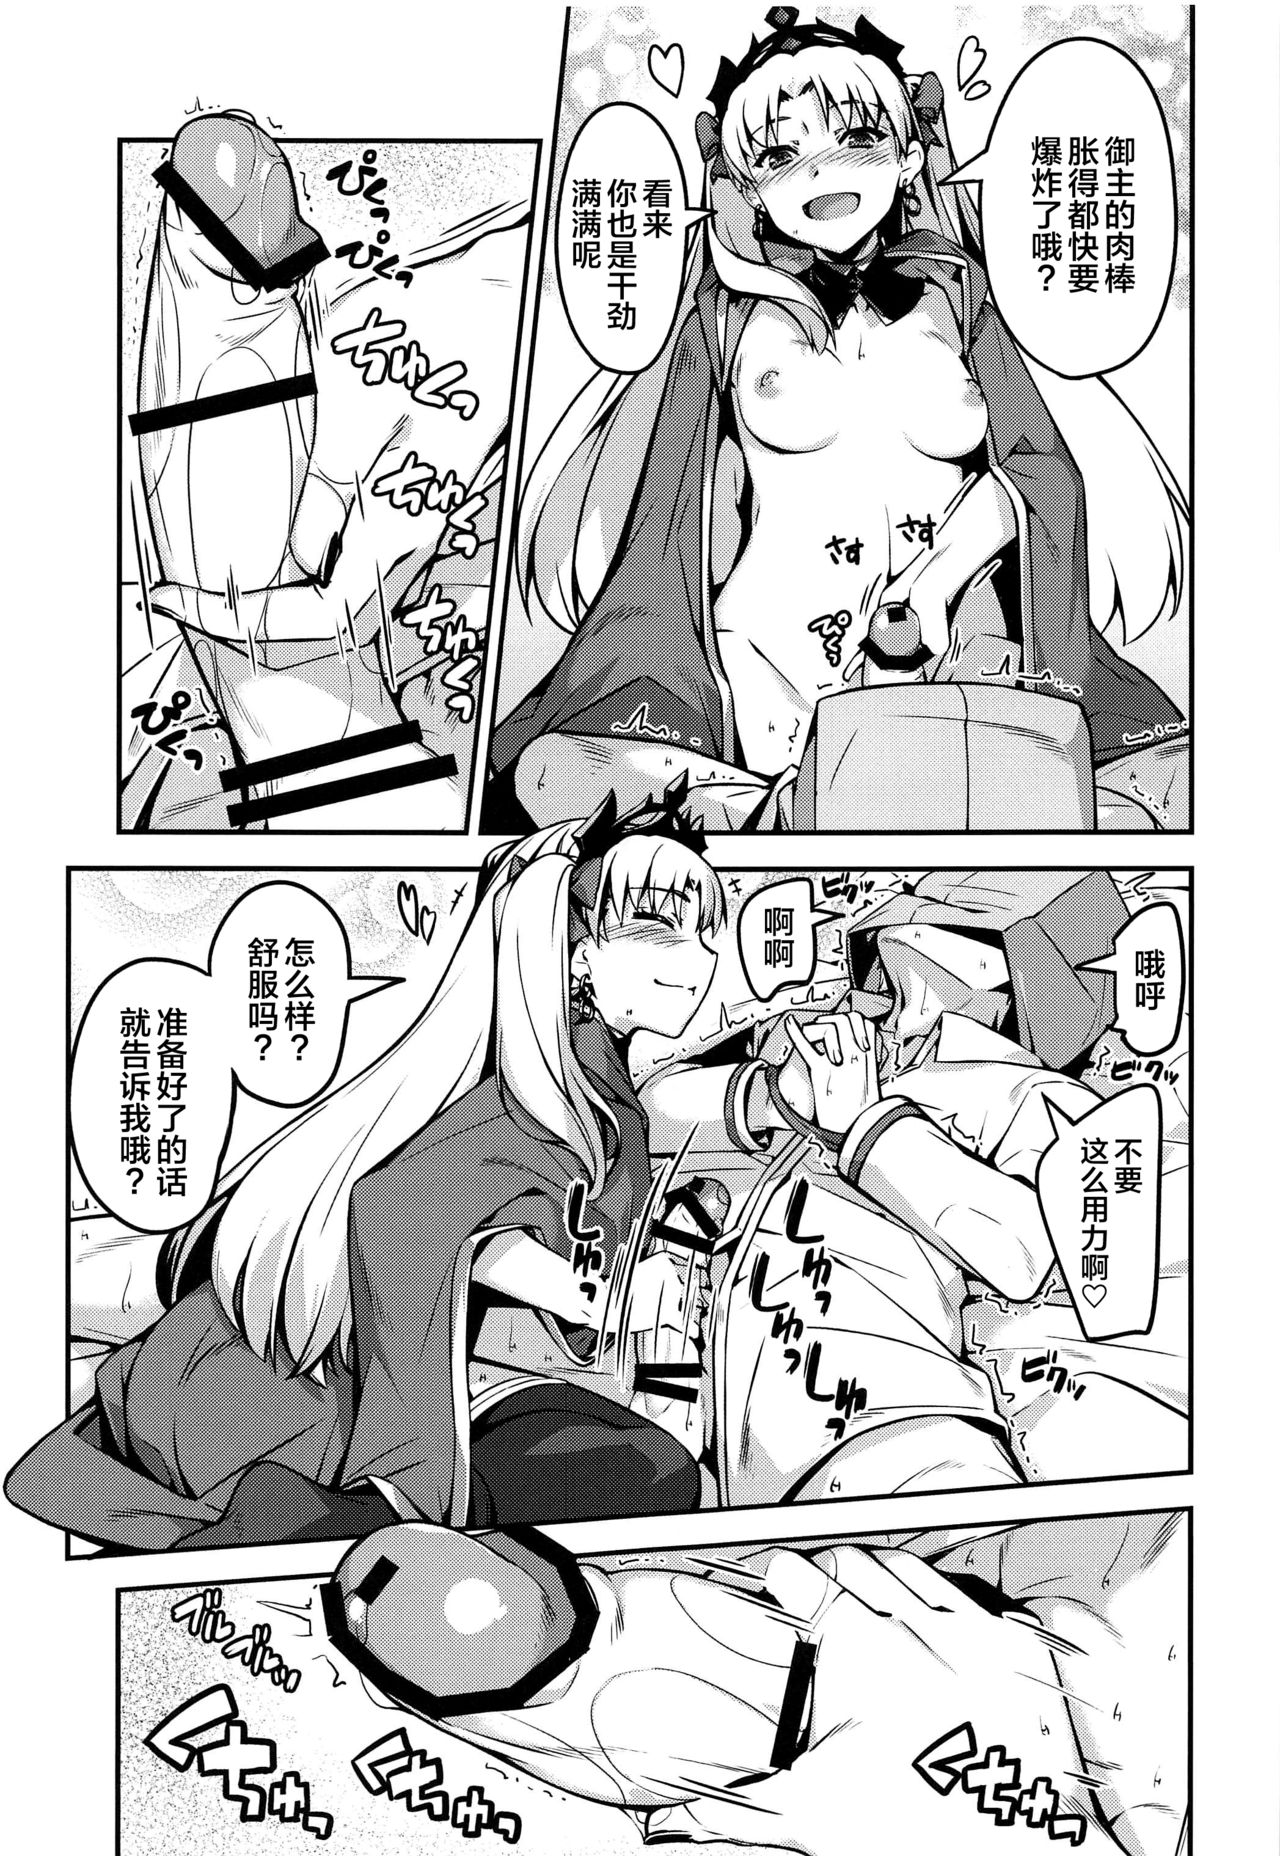 (C97) [Kansyouyou Marmotte (Mr.Lostman)] Hiroigui. (Fate/Grand Order) [Chinese] [黎欧×新桥月白日语社] page 10 full